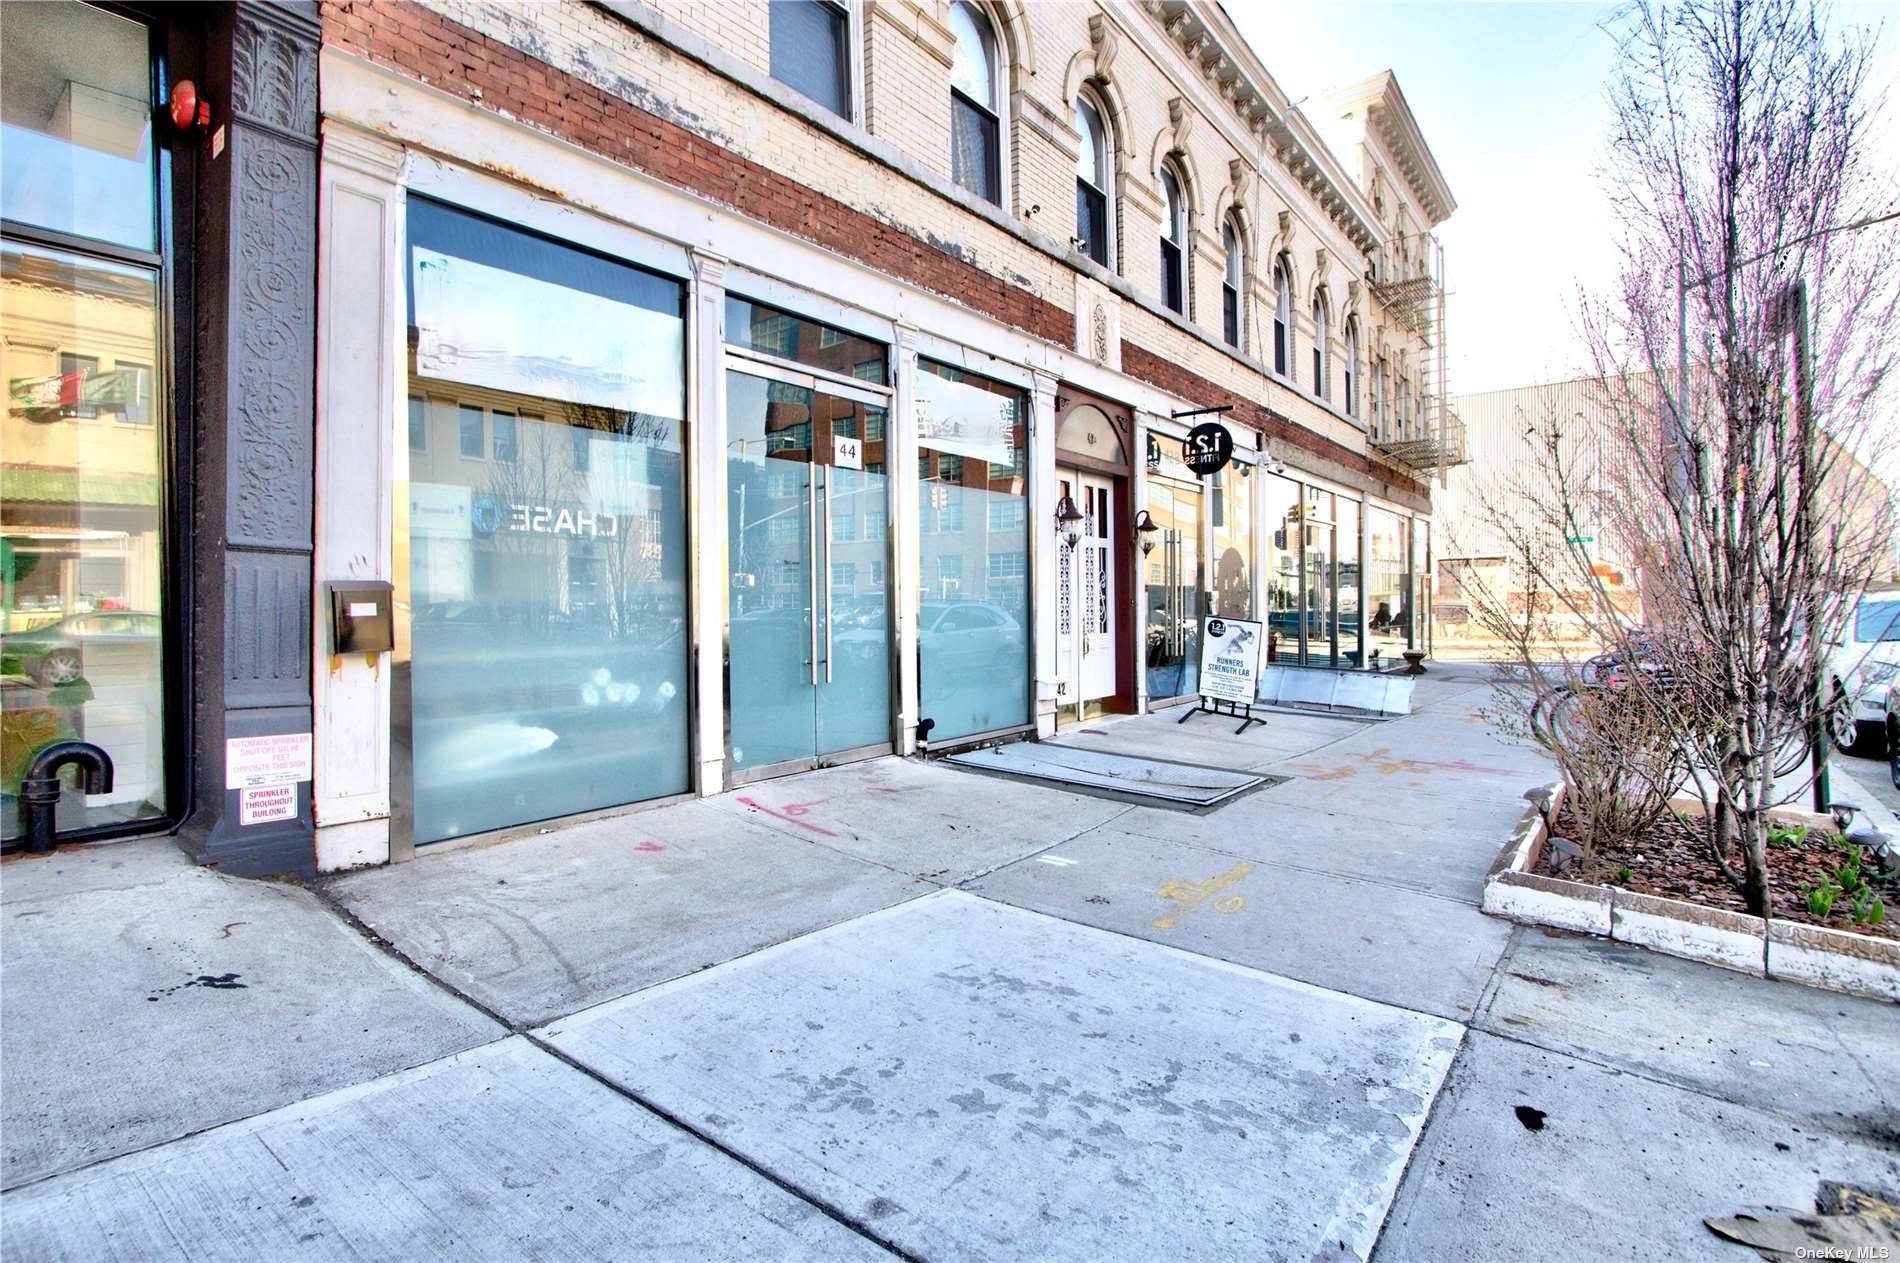 Amazing 3200 sq retail storefront with basement.